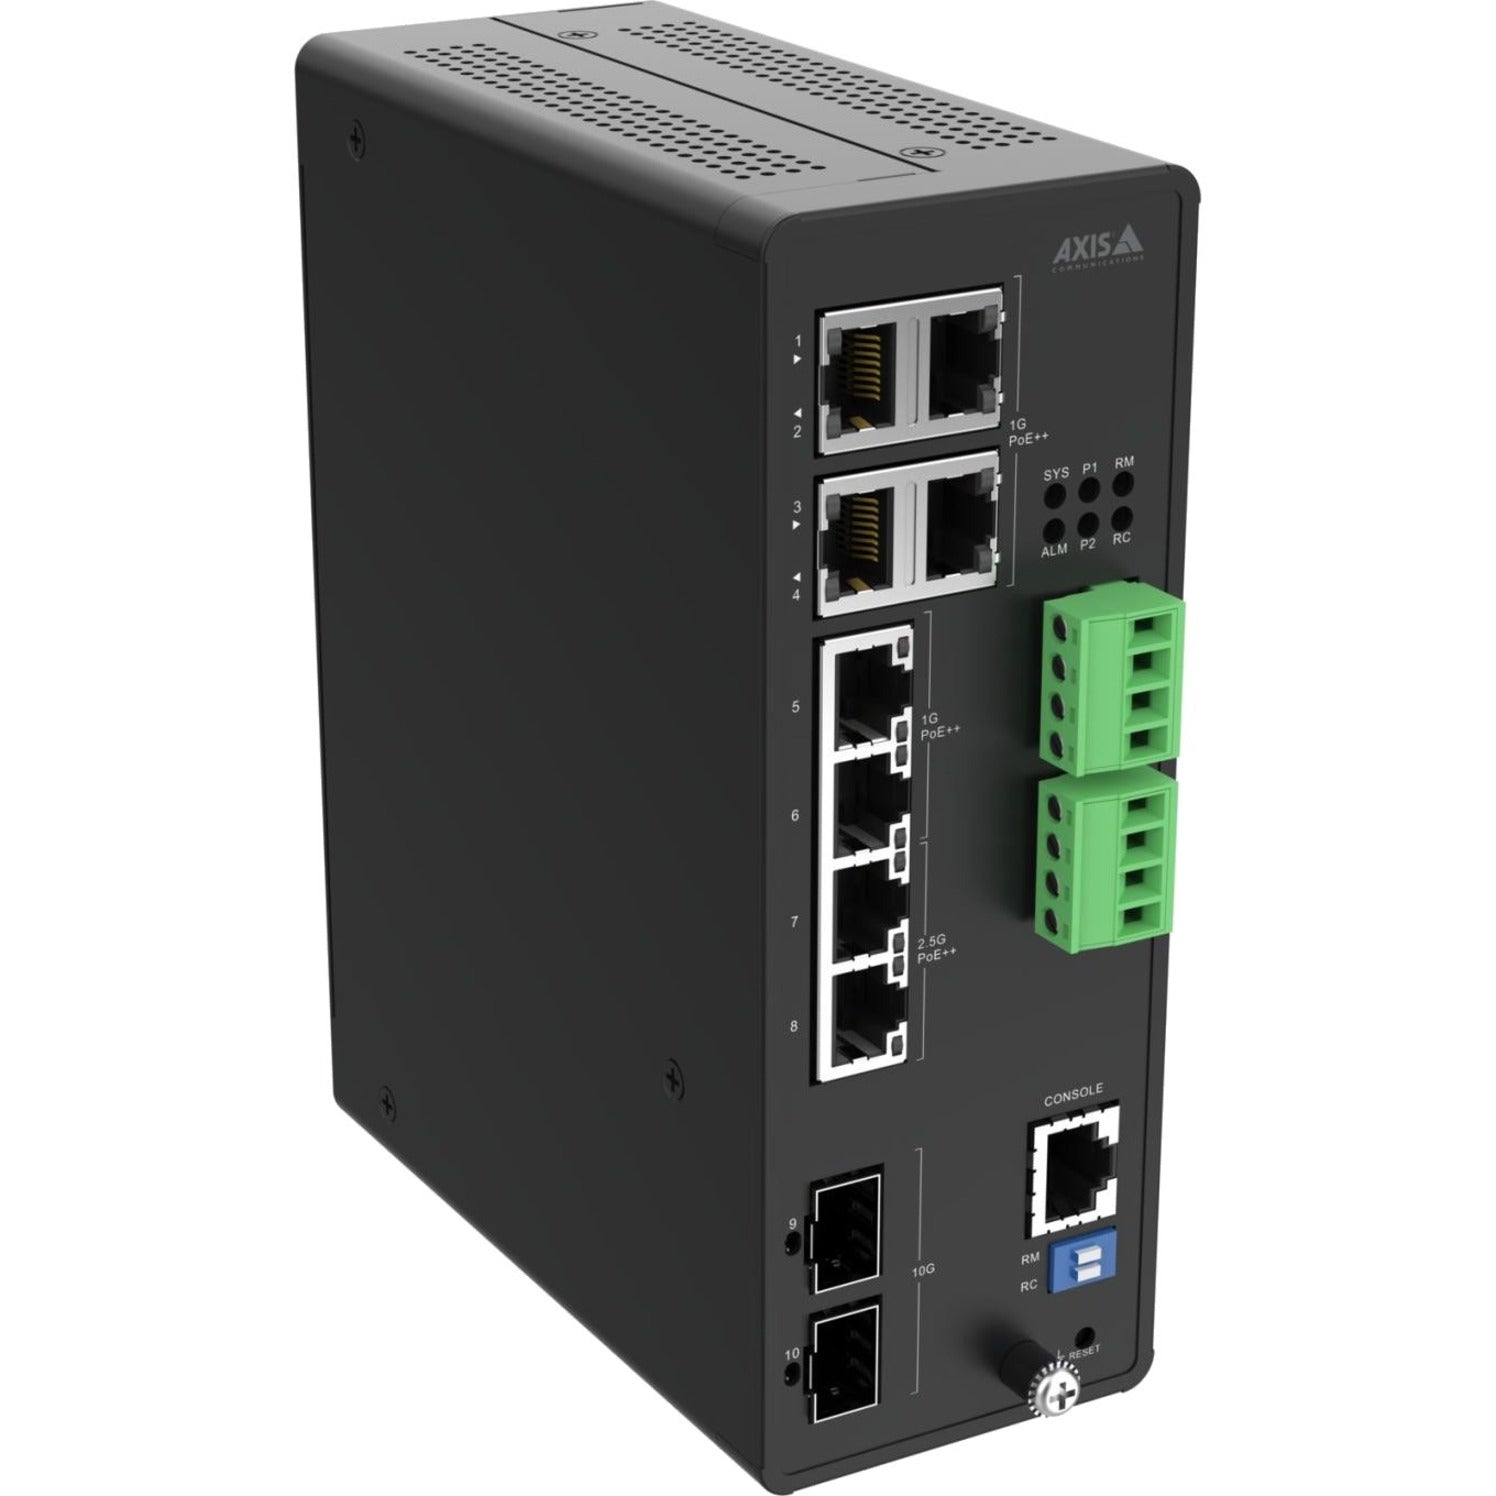 AXIS 02621-001 D8208-R Industrial PoE++ Switch, 8-Port Gigabit Ethernet with 2 x 10G Expansion Slots, 480W PoE Budget